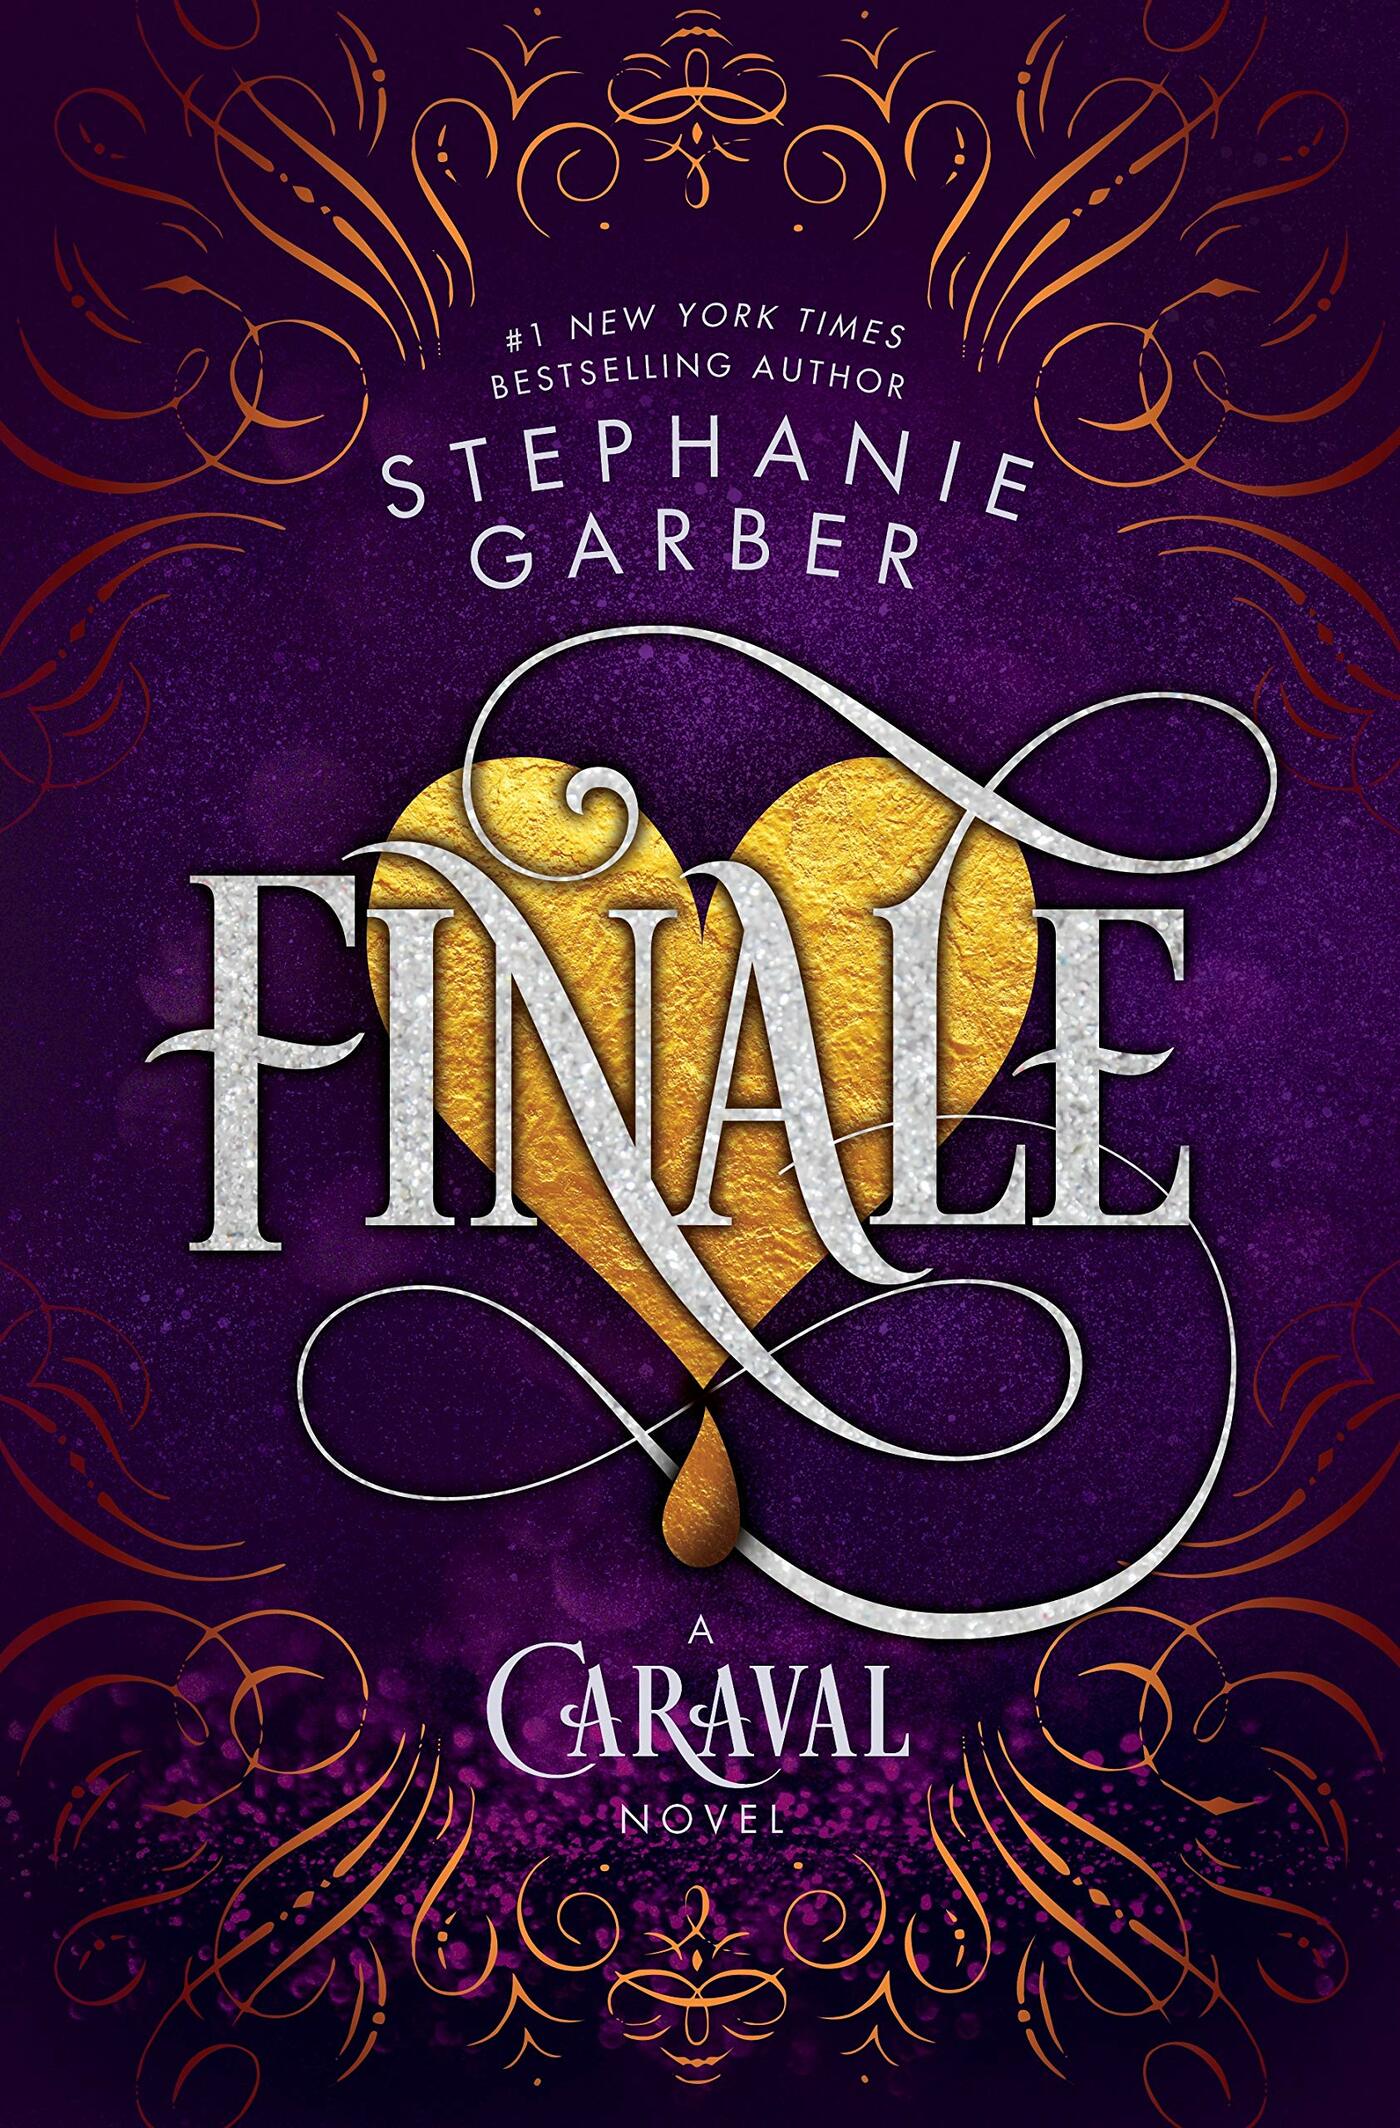 the caraval series